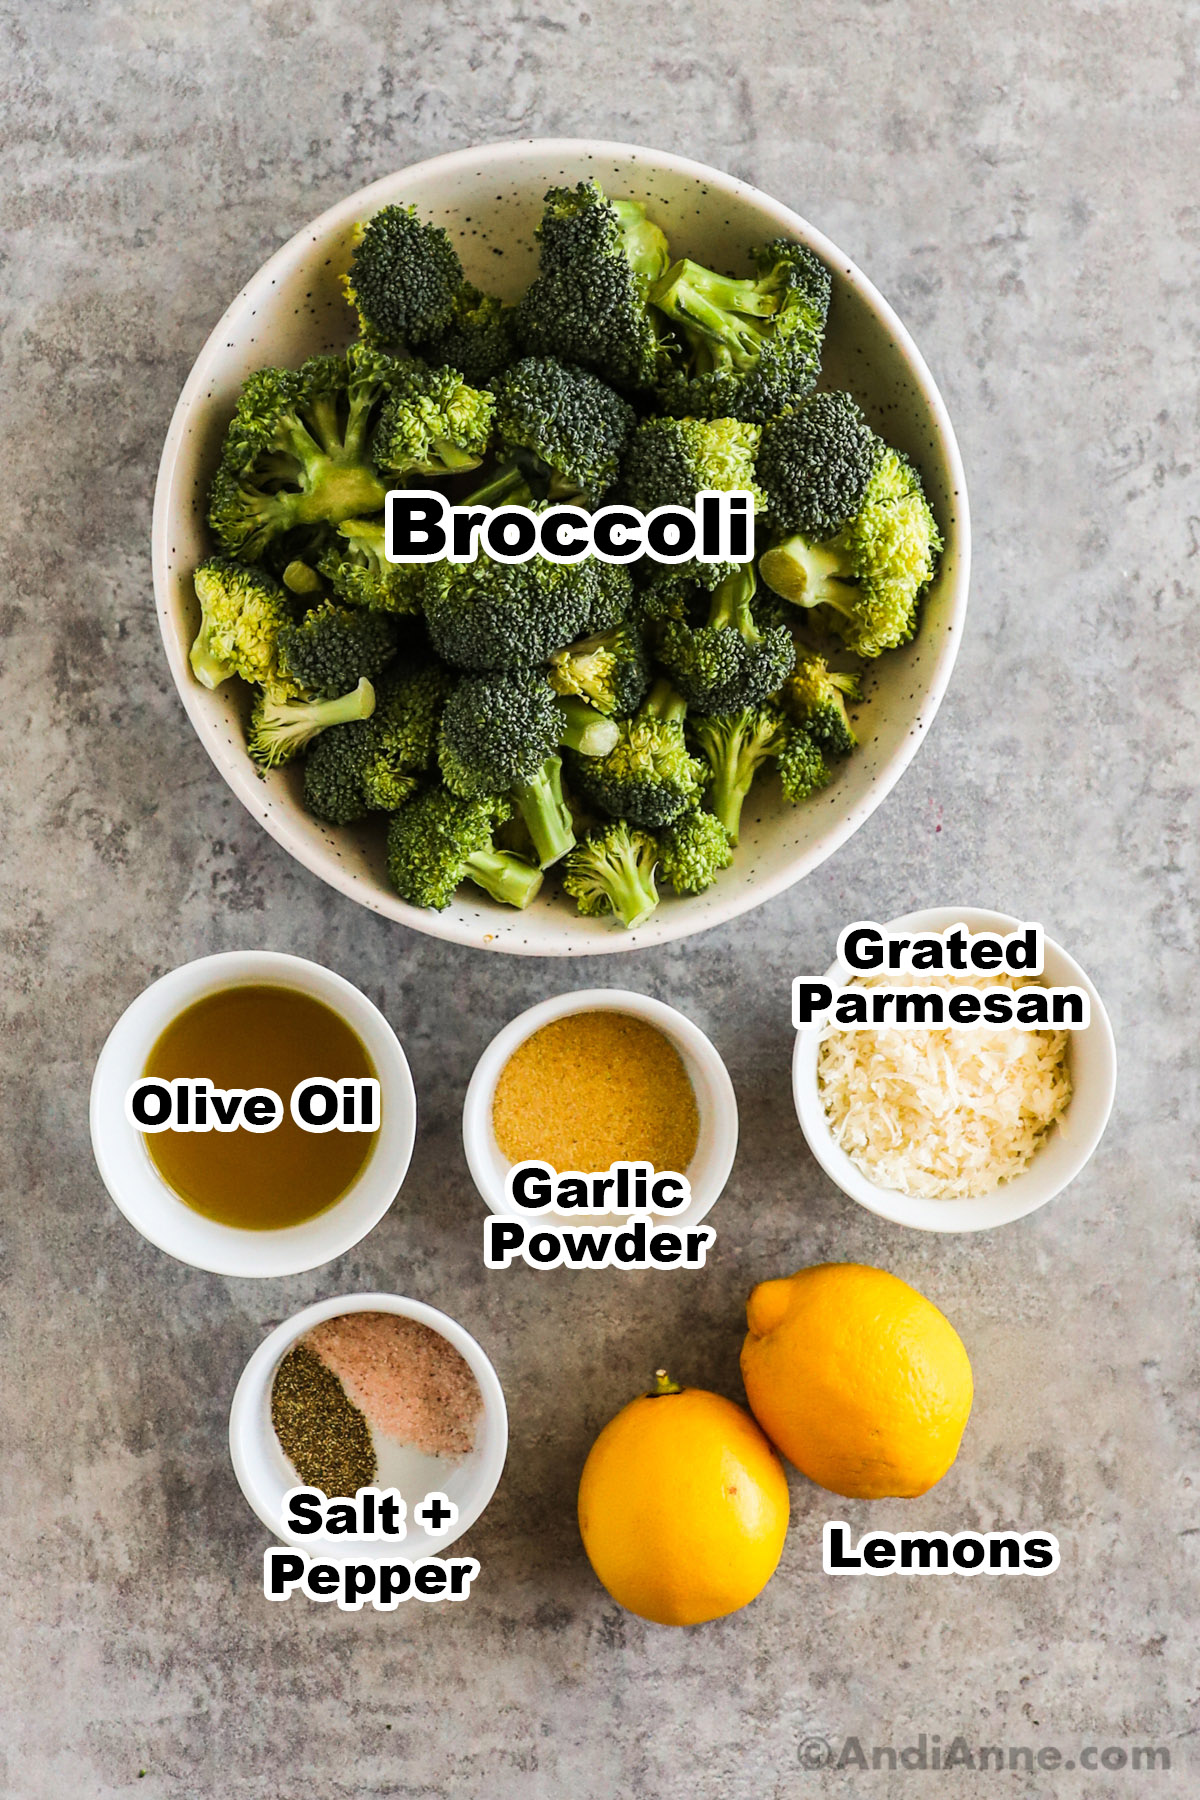 Recipe ingredients including bowls of broccoli florets, olive oil, garlic powder, grated parmesan cheese, salt and pepper and two lemons.